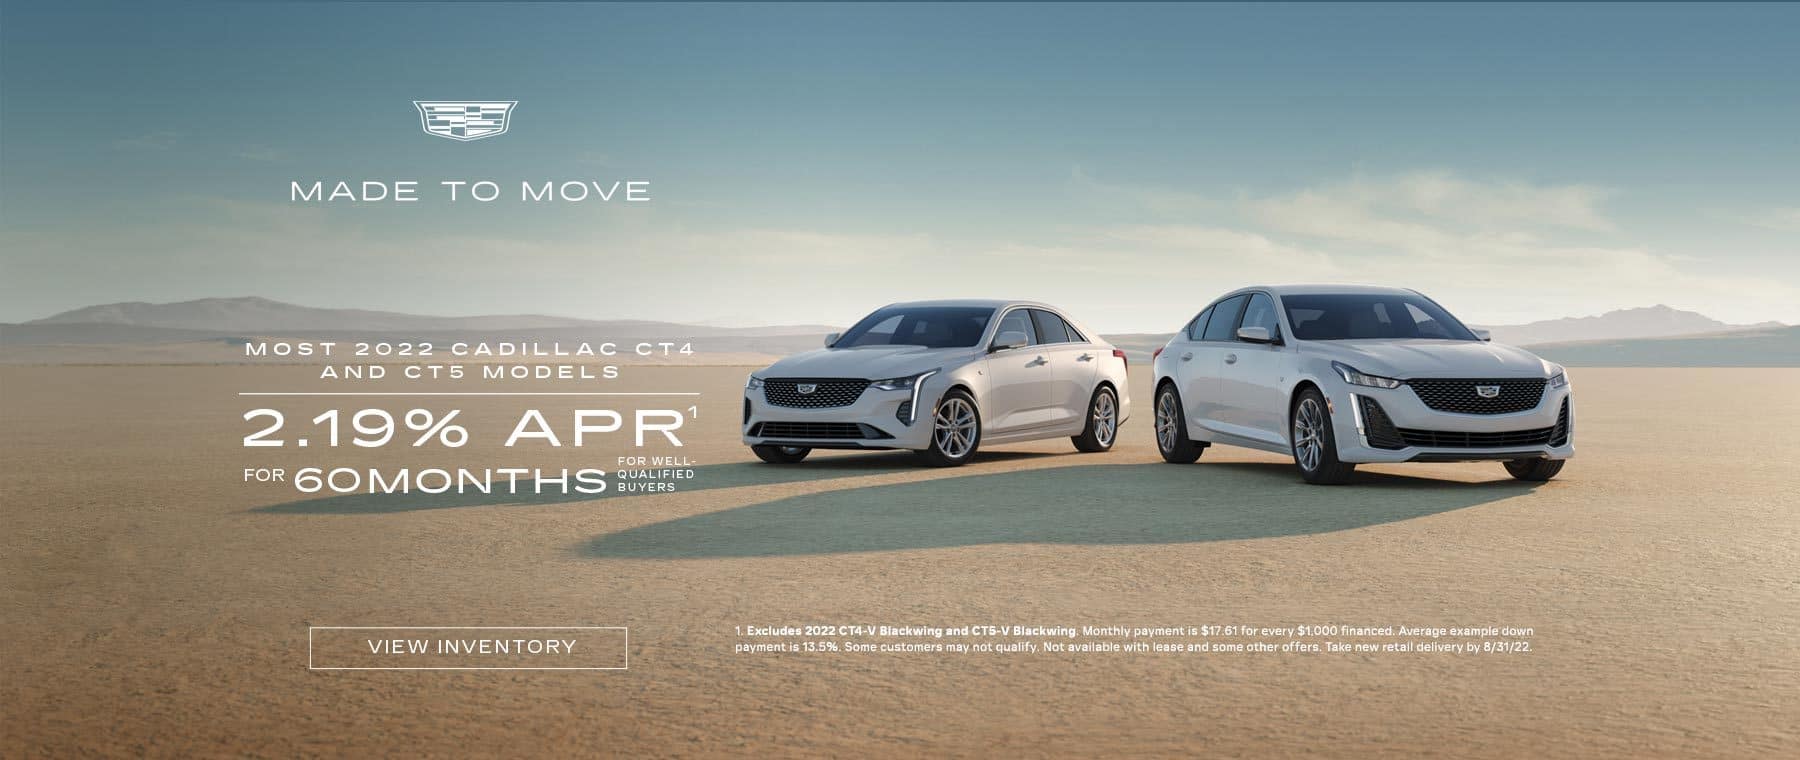 2022 Cadillac CT4 and CT5. 2.19% for 60 months for well-qualified buyers.